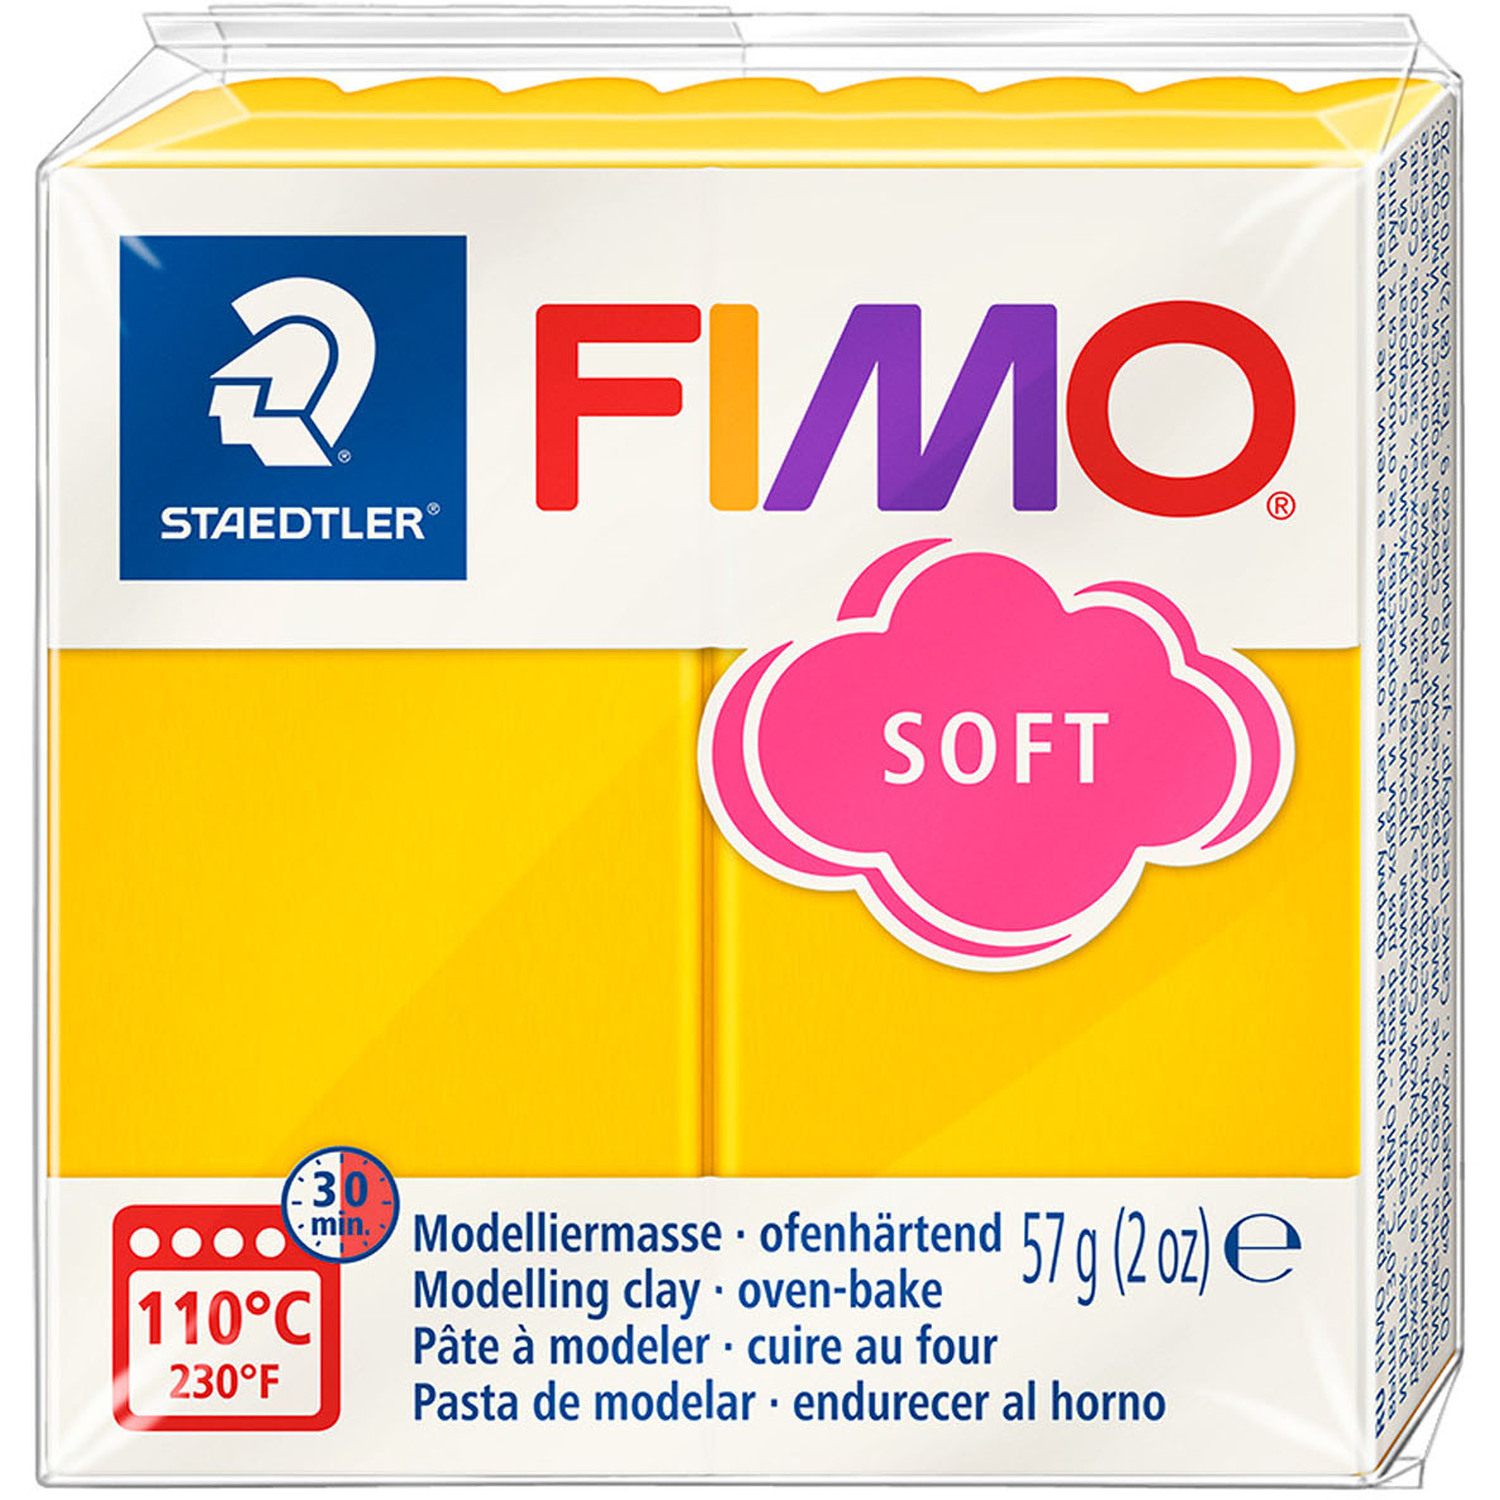 Staedtler FIMO Soft Modelling Clay Block - Sunflower Image 1